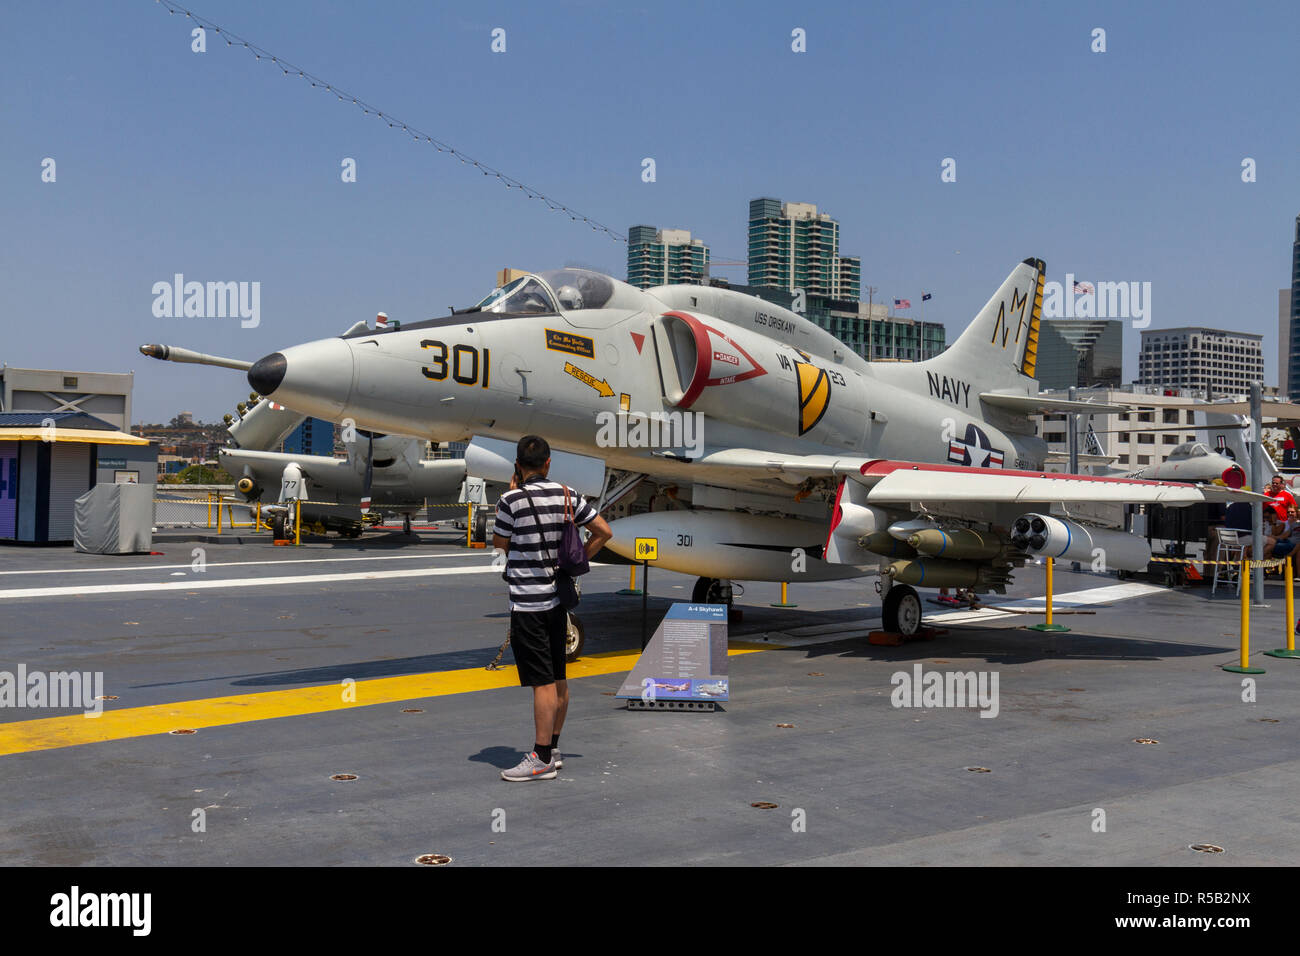 A Douglas A-4 Skyhawk attack aircraft, USS Midway Museum, San Diego, California, United States. Stock Photo